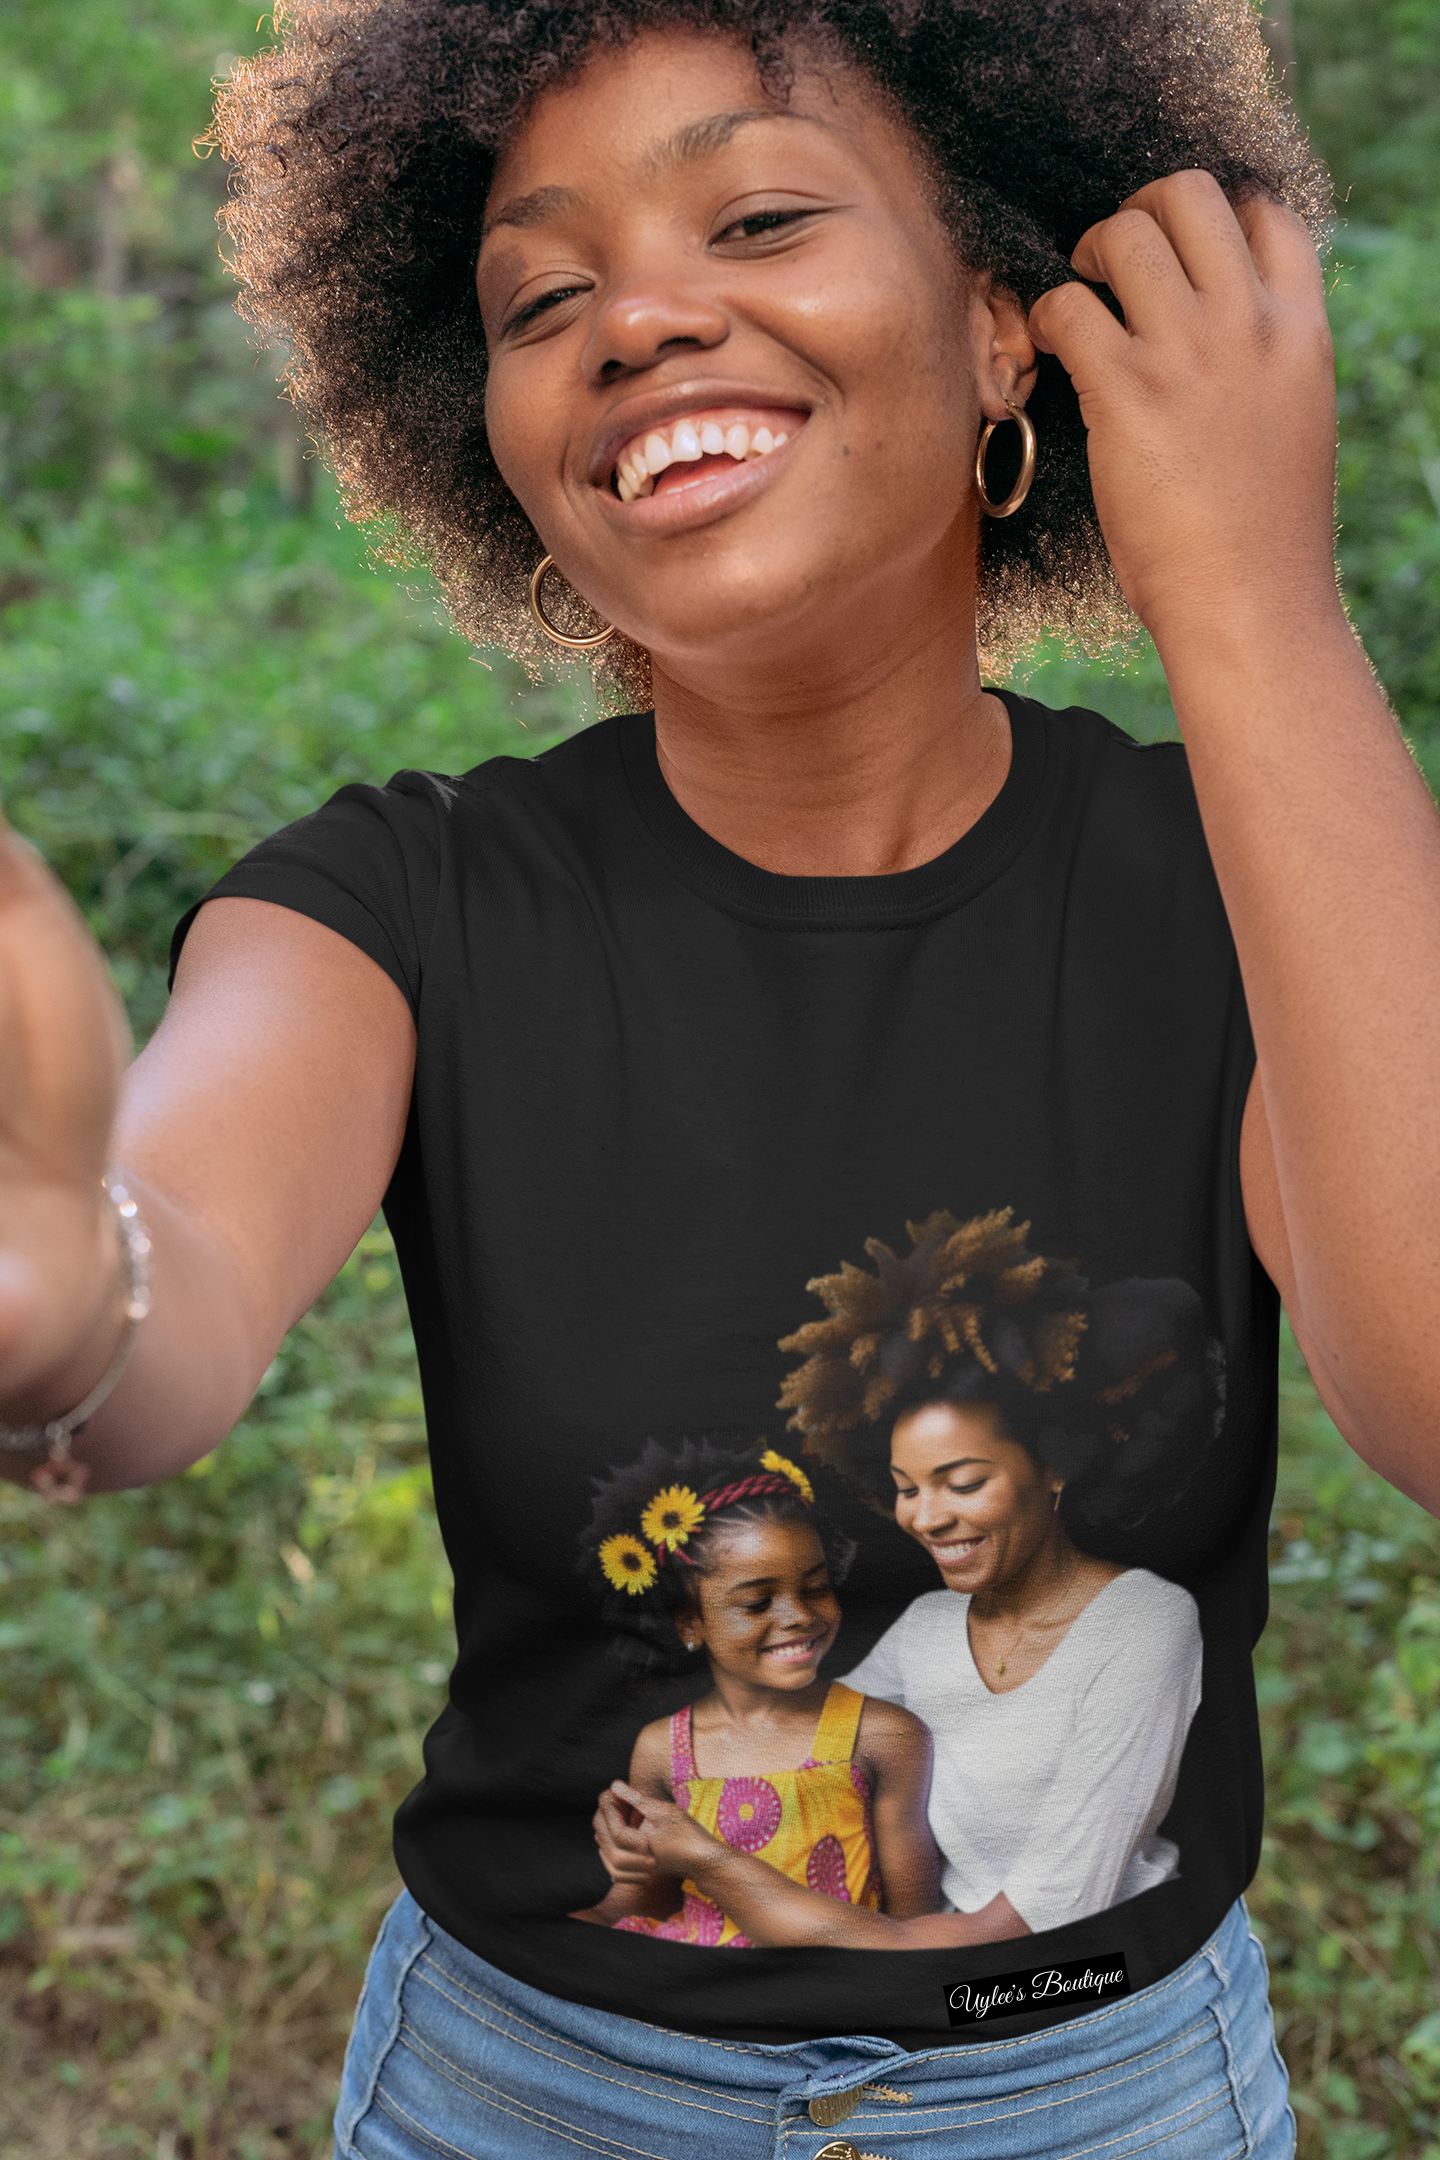 Mother And Daughter Love Ladies T Shirt